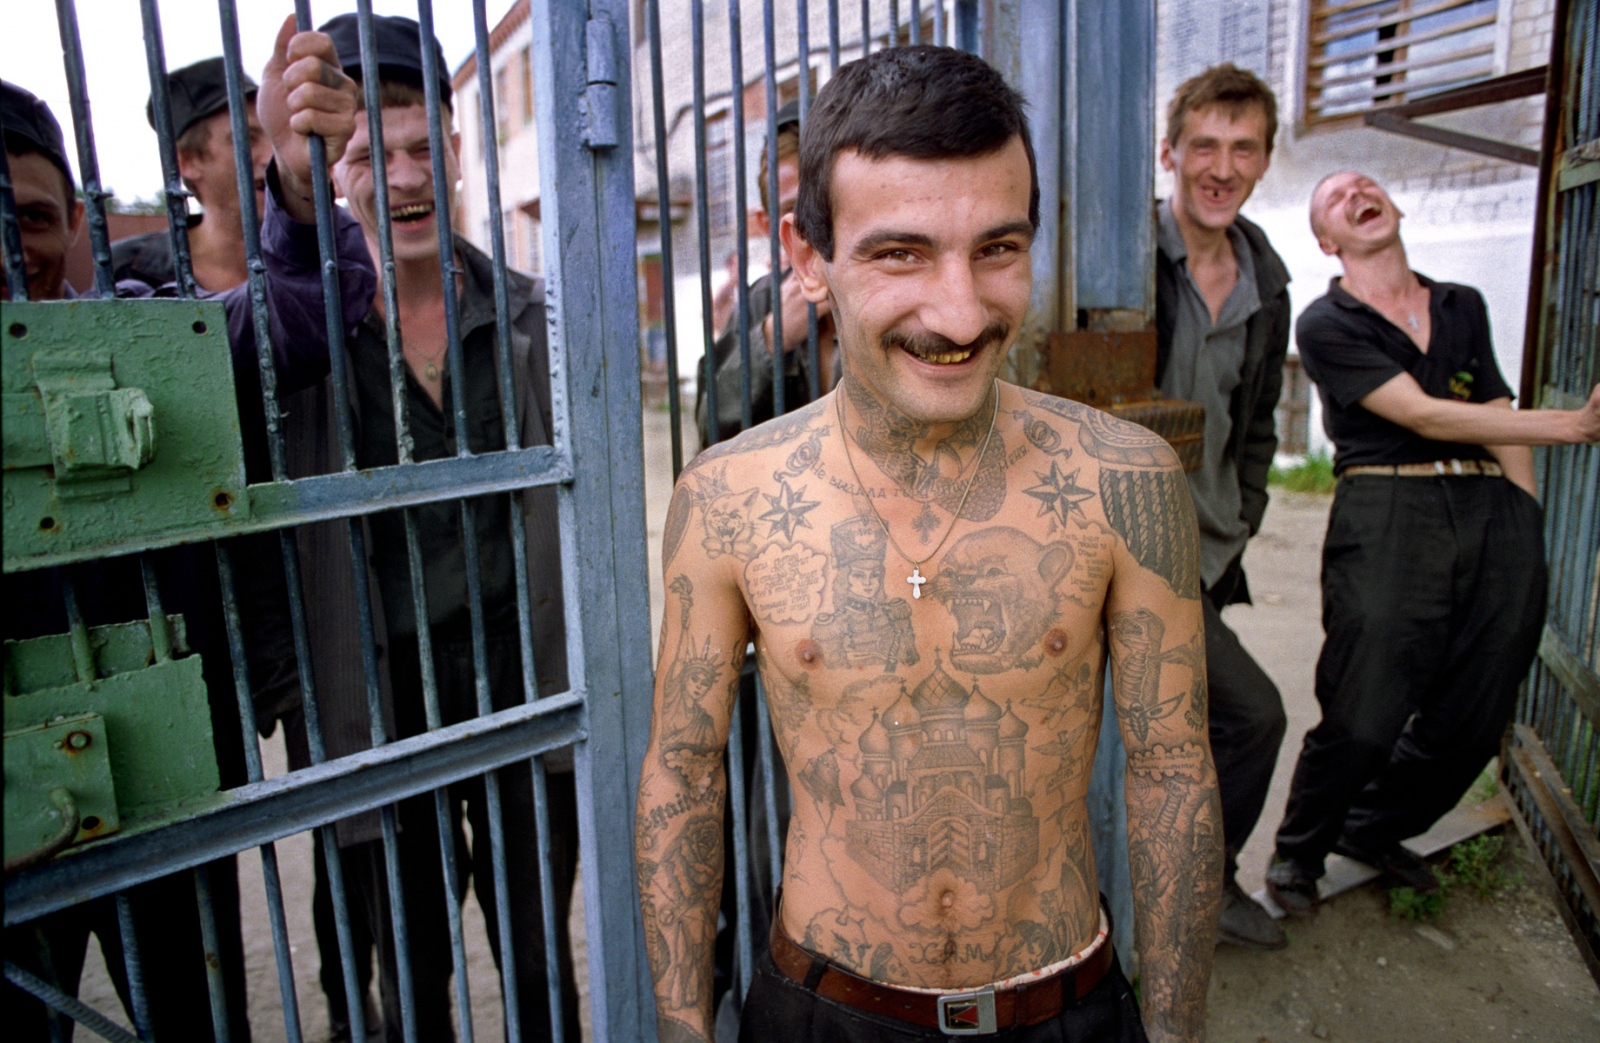 Russia In Transition - 1990s - At the high-security labor camp in Kovrov, Russia, 150...